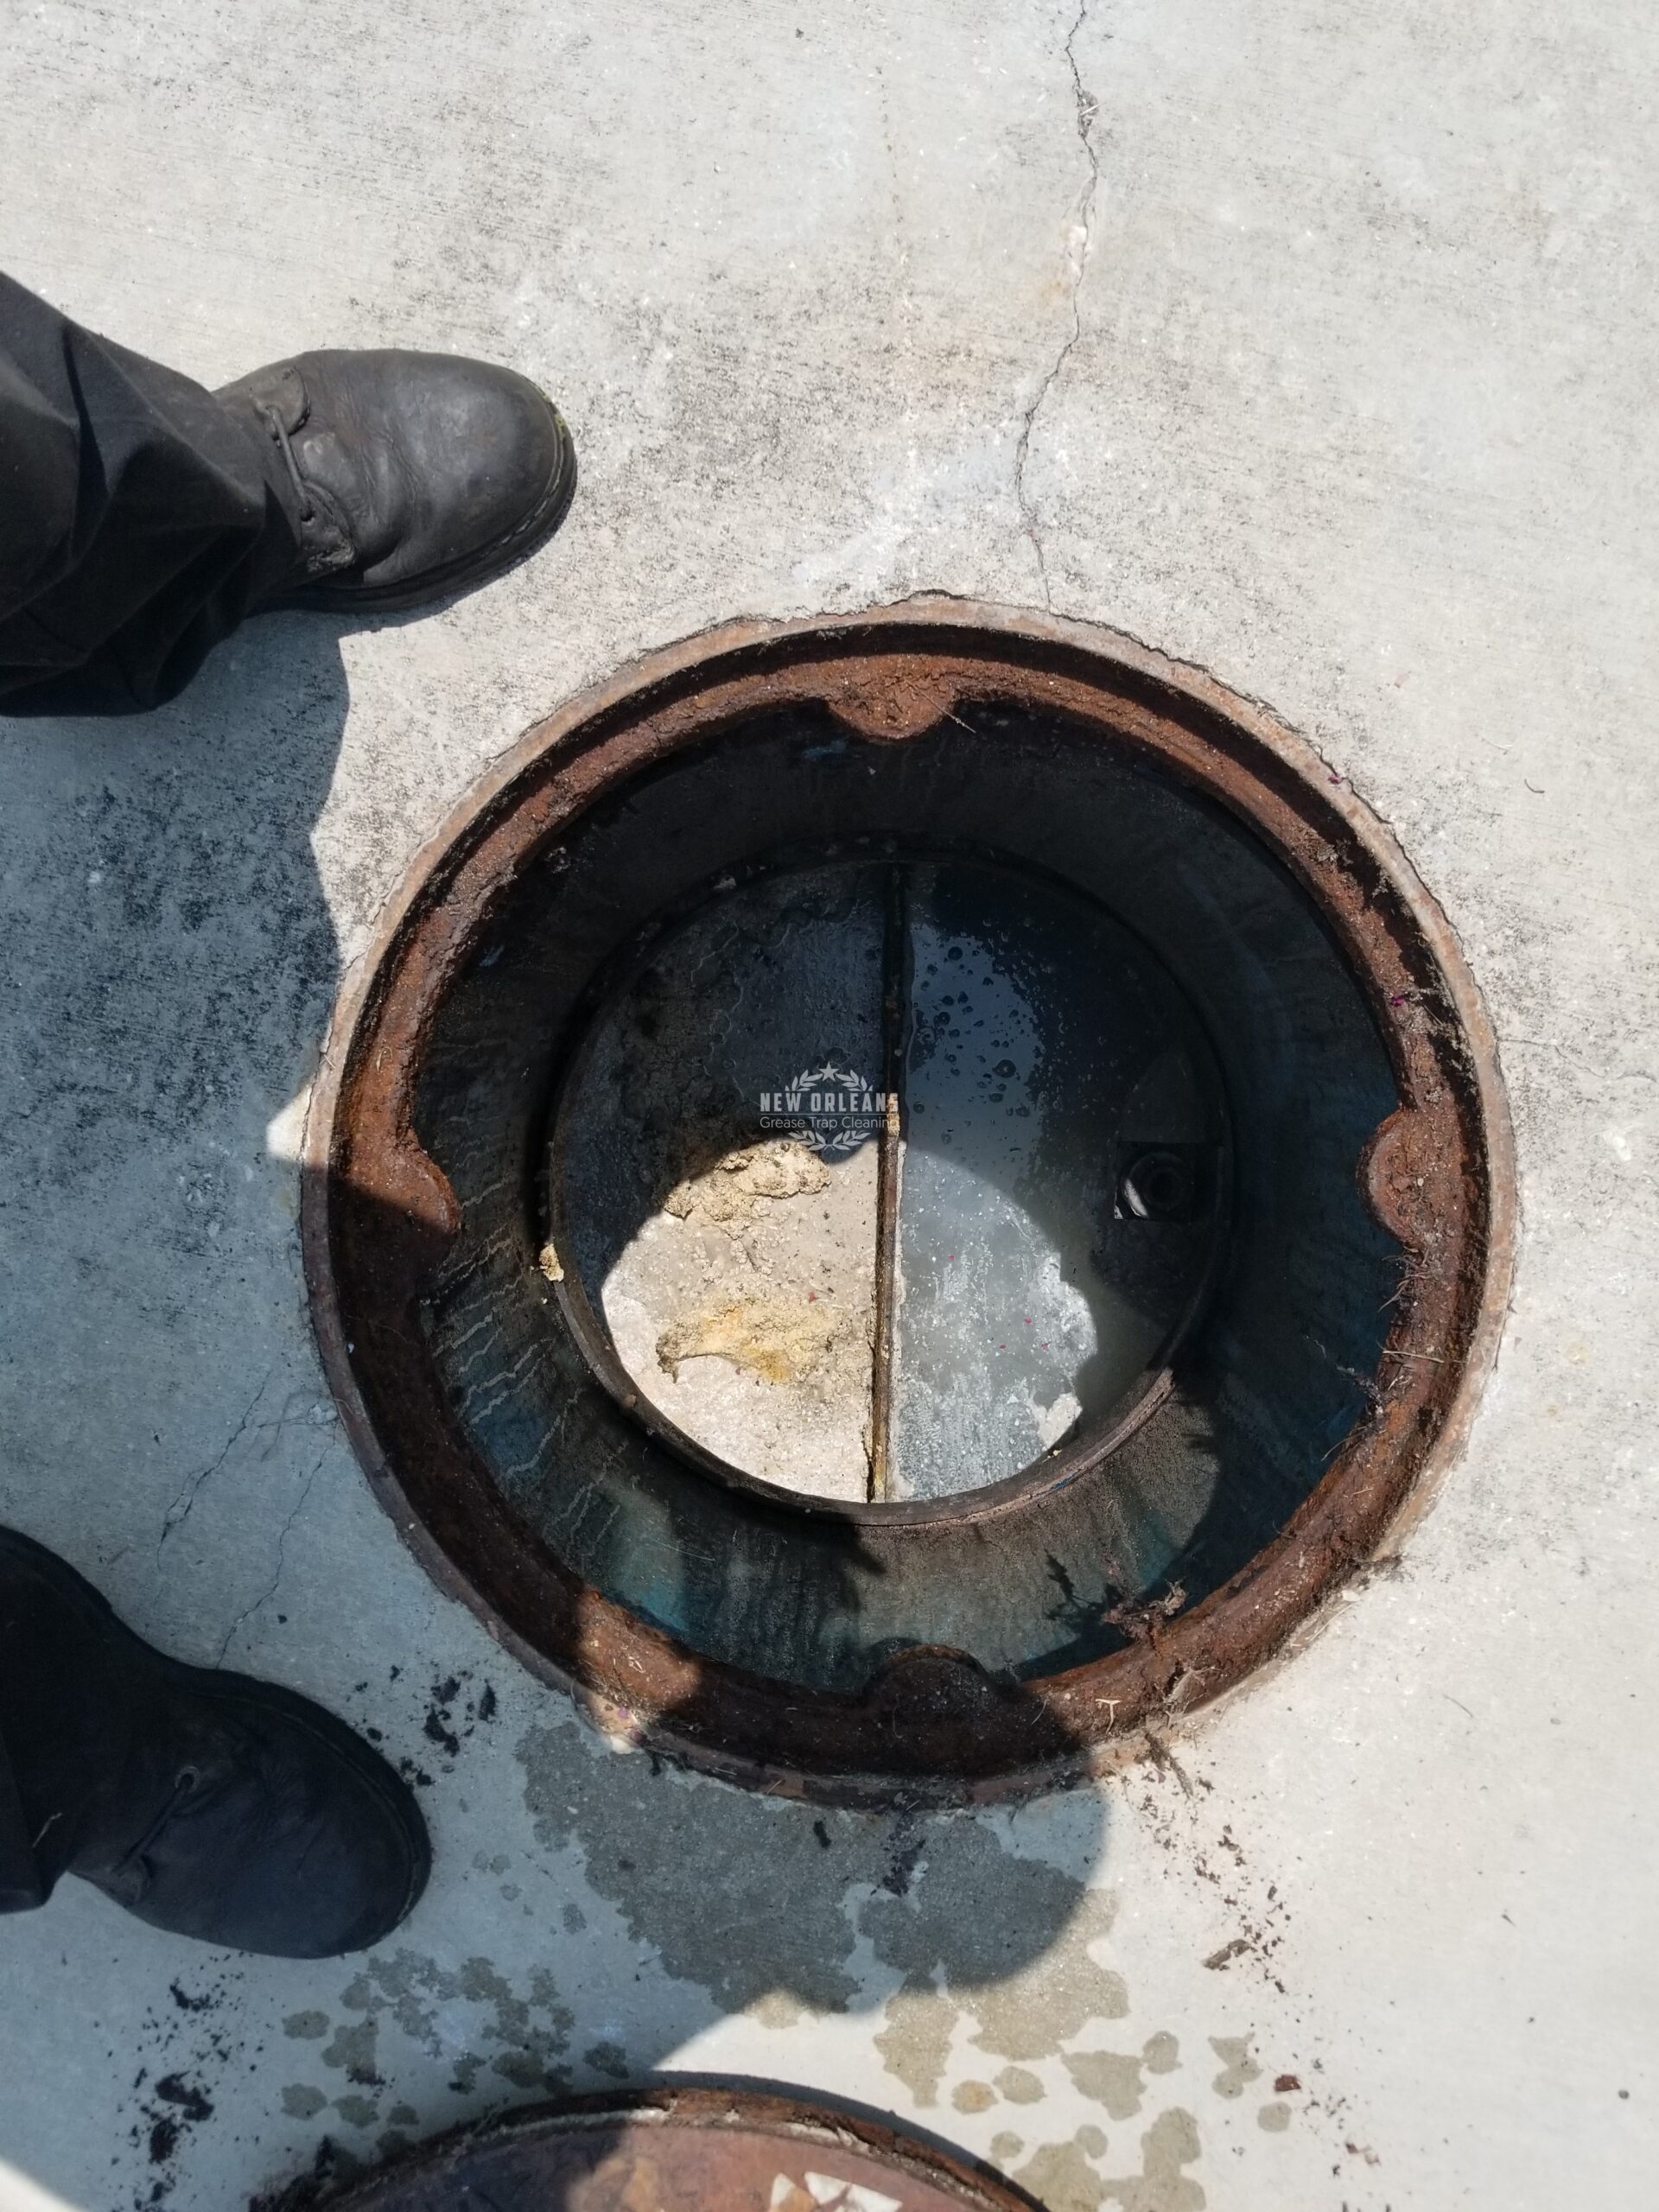 Is My Grease Trap or Interceptor Full - NOLA Grease Trap Cleaning